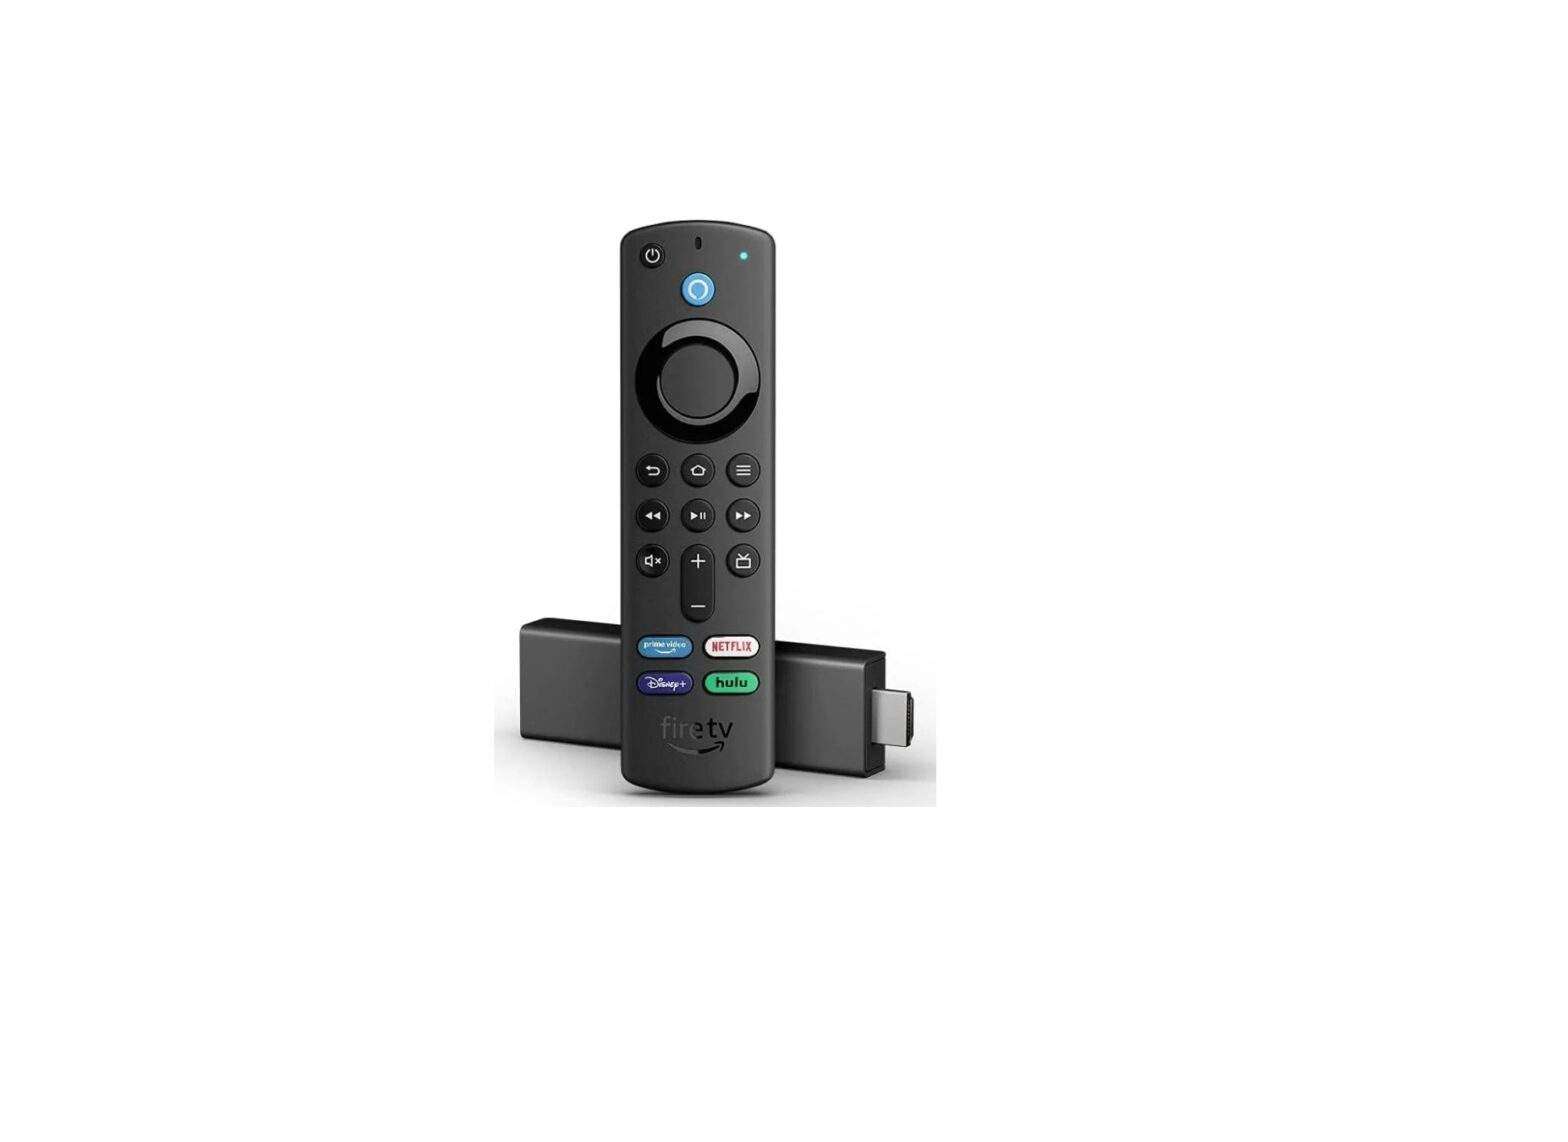 Amazon Fire TV Stick 4K streaming device with latest Alexa Voice Remote User Manual - Featured image